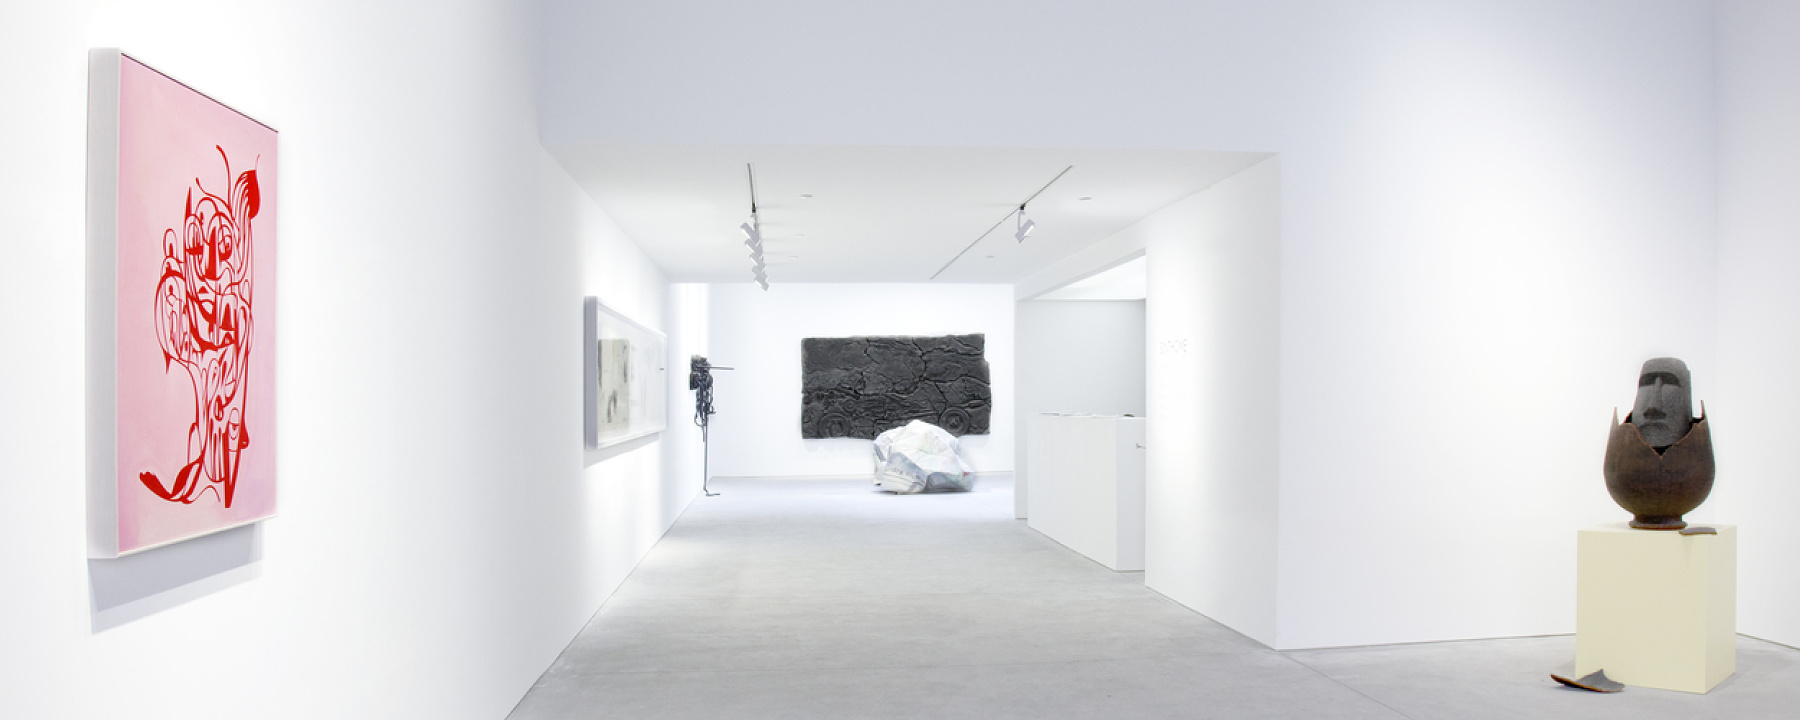 Professional art gallery with track lighting